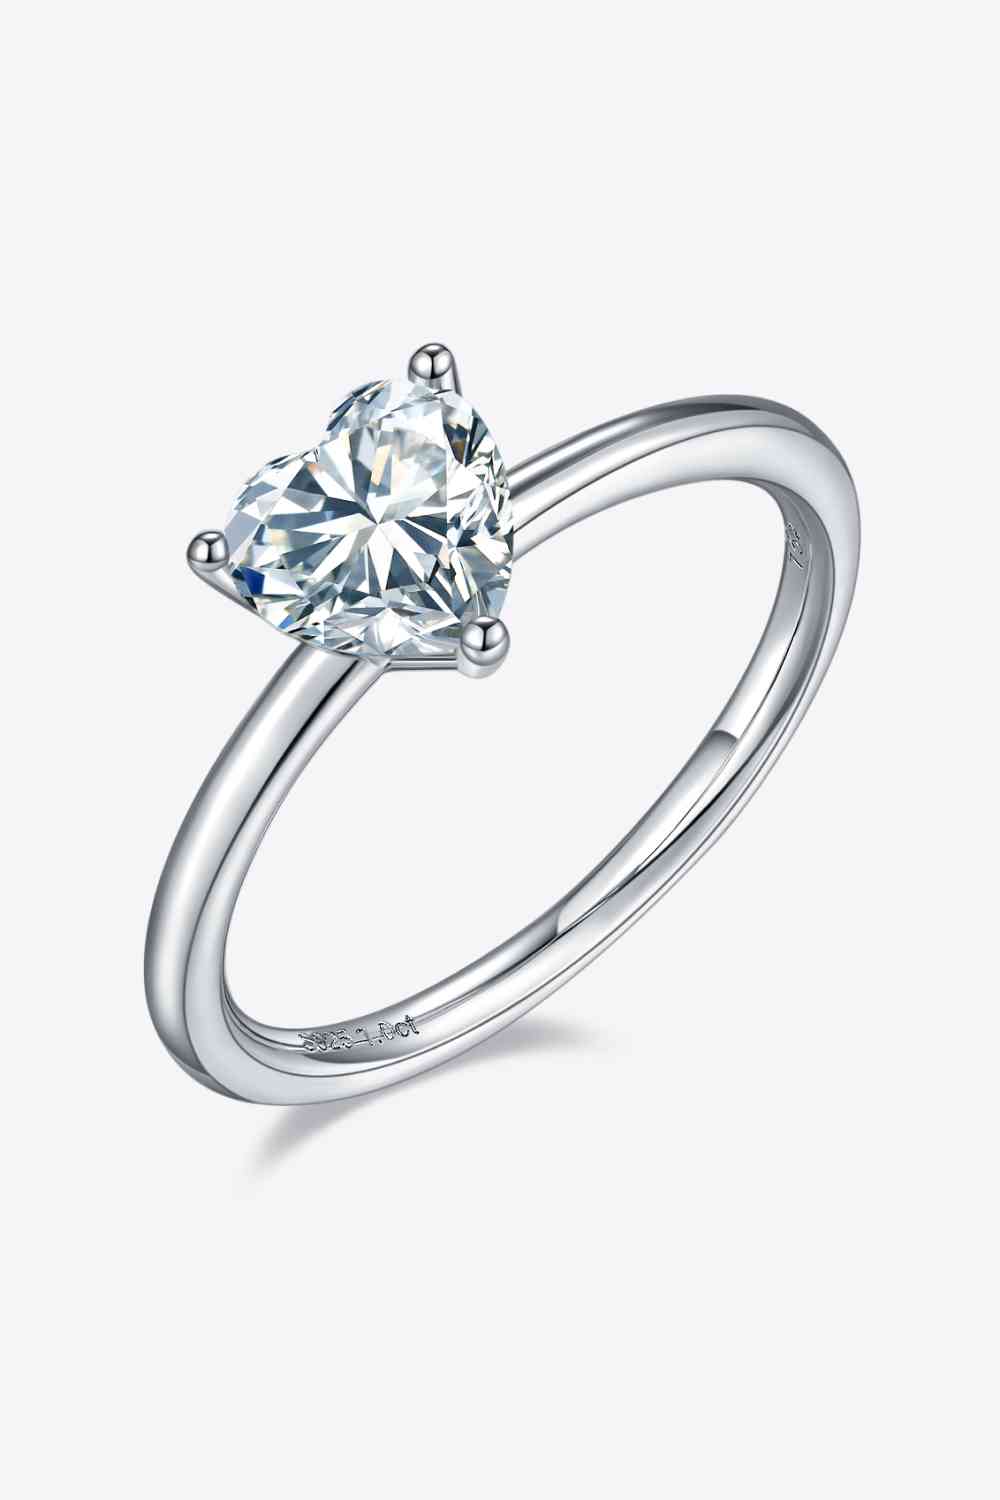 1 Carat Moissanite 925 Sterling Silver Solitaire Ring Heart